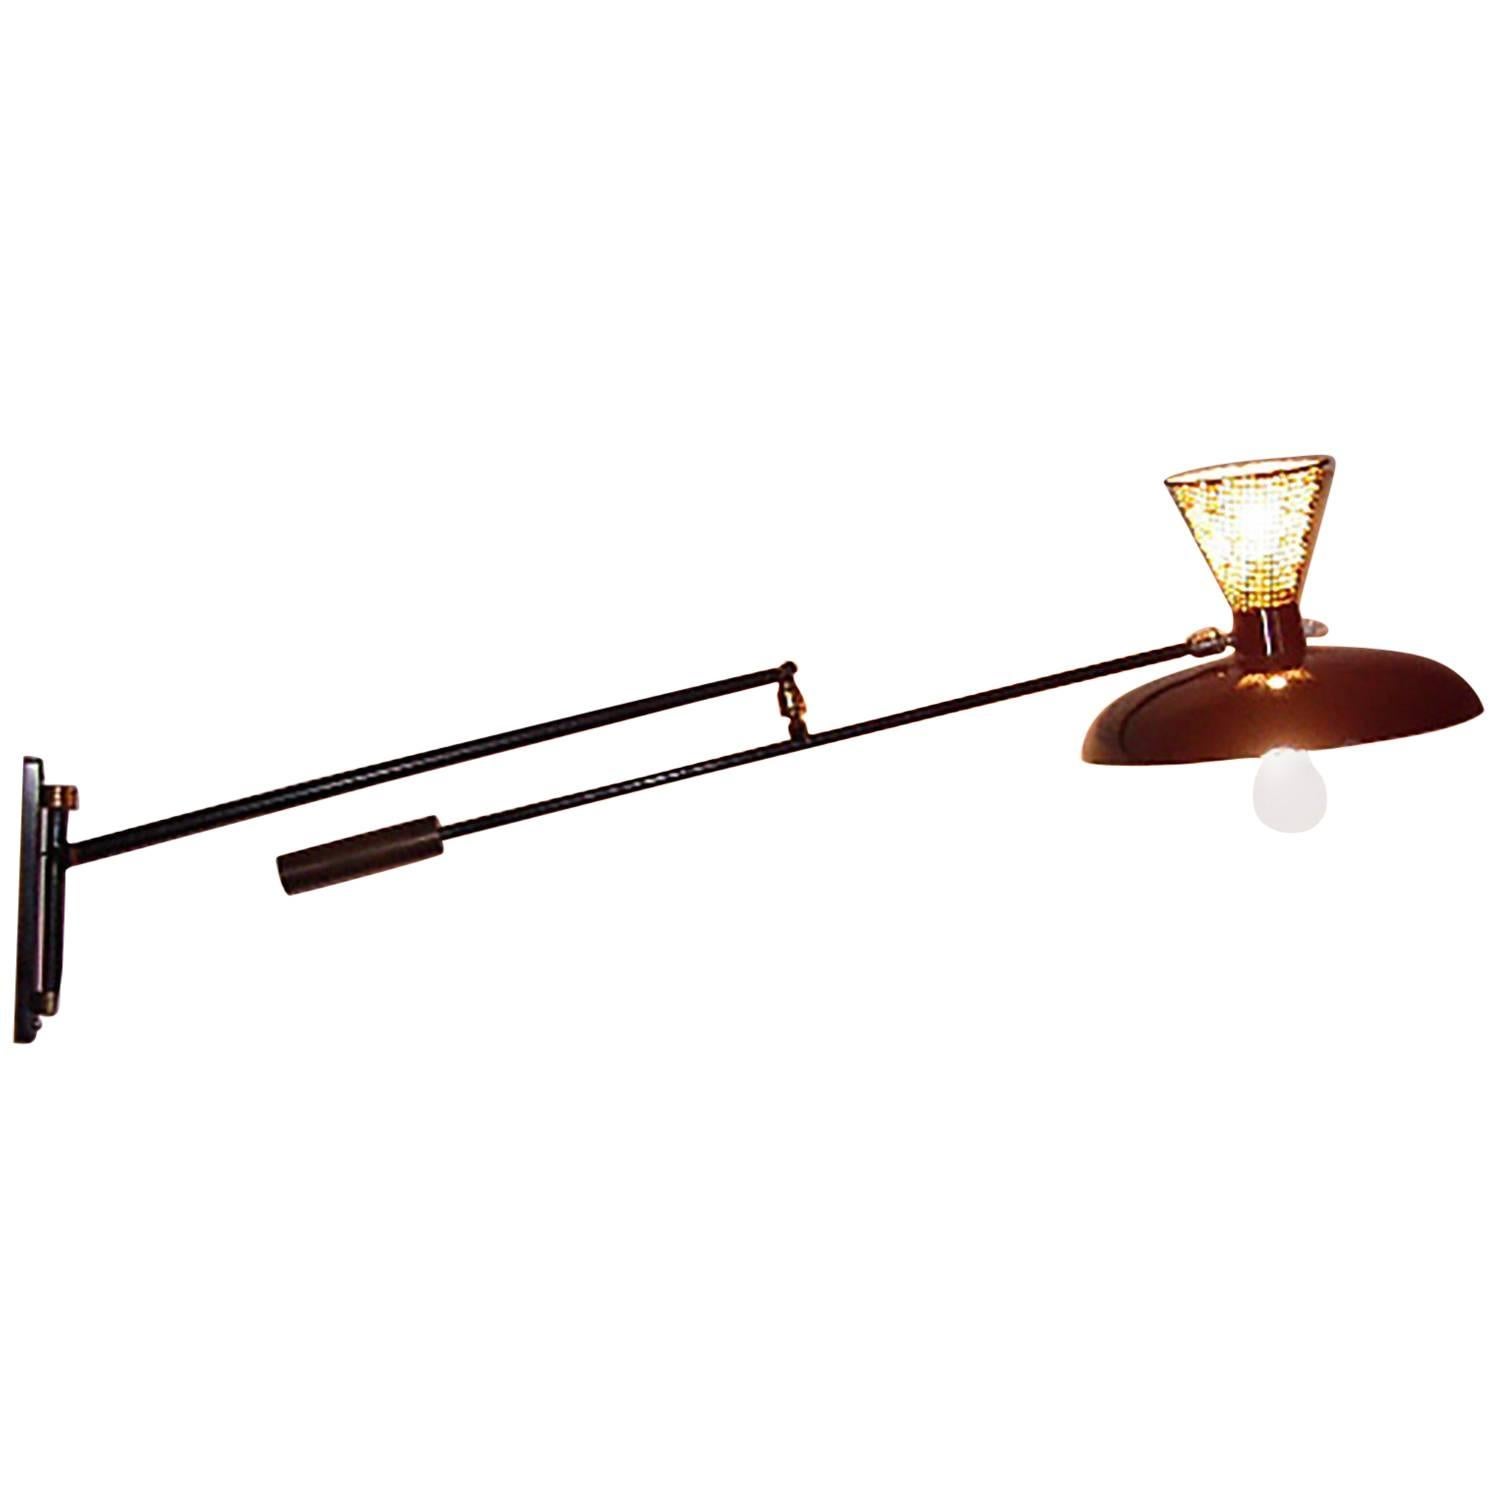 Italian Adjustable Wall Lamp in the Arredoluce Style, Milano, 1950s For Sale